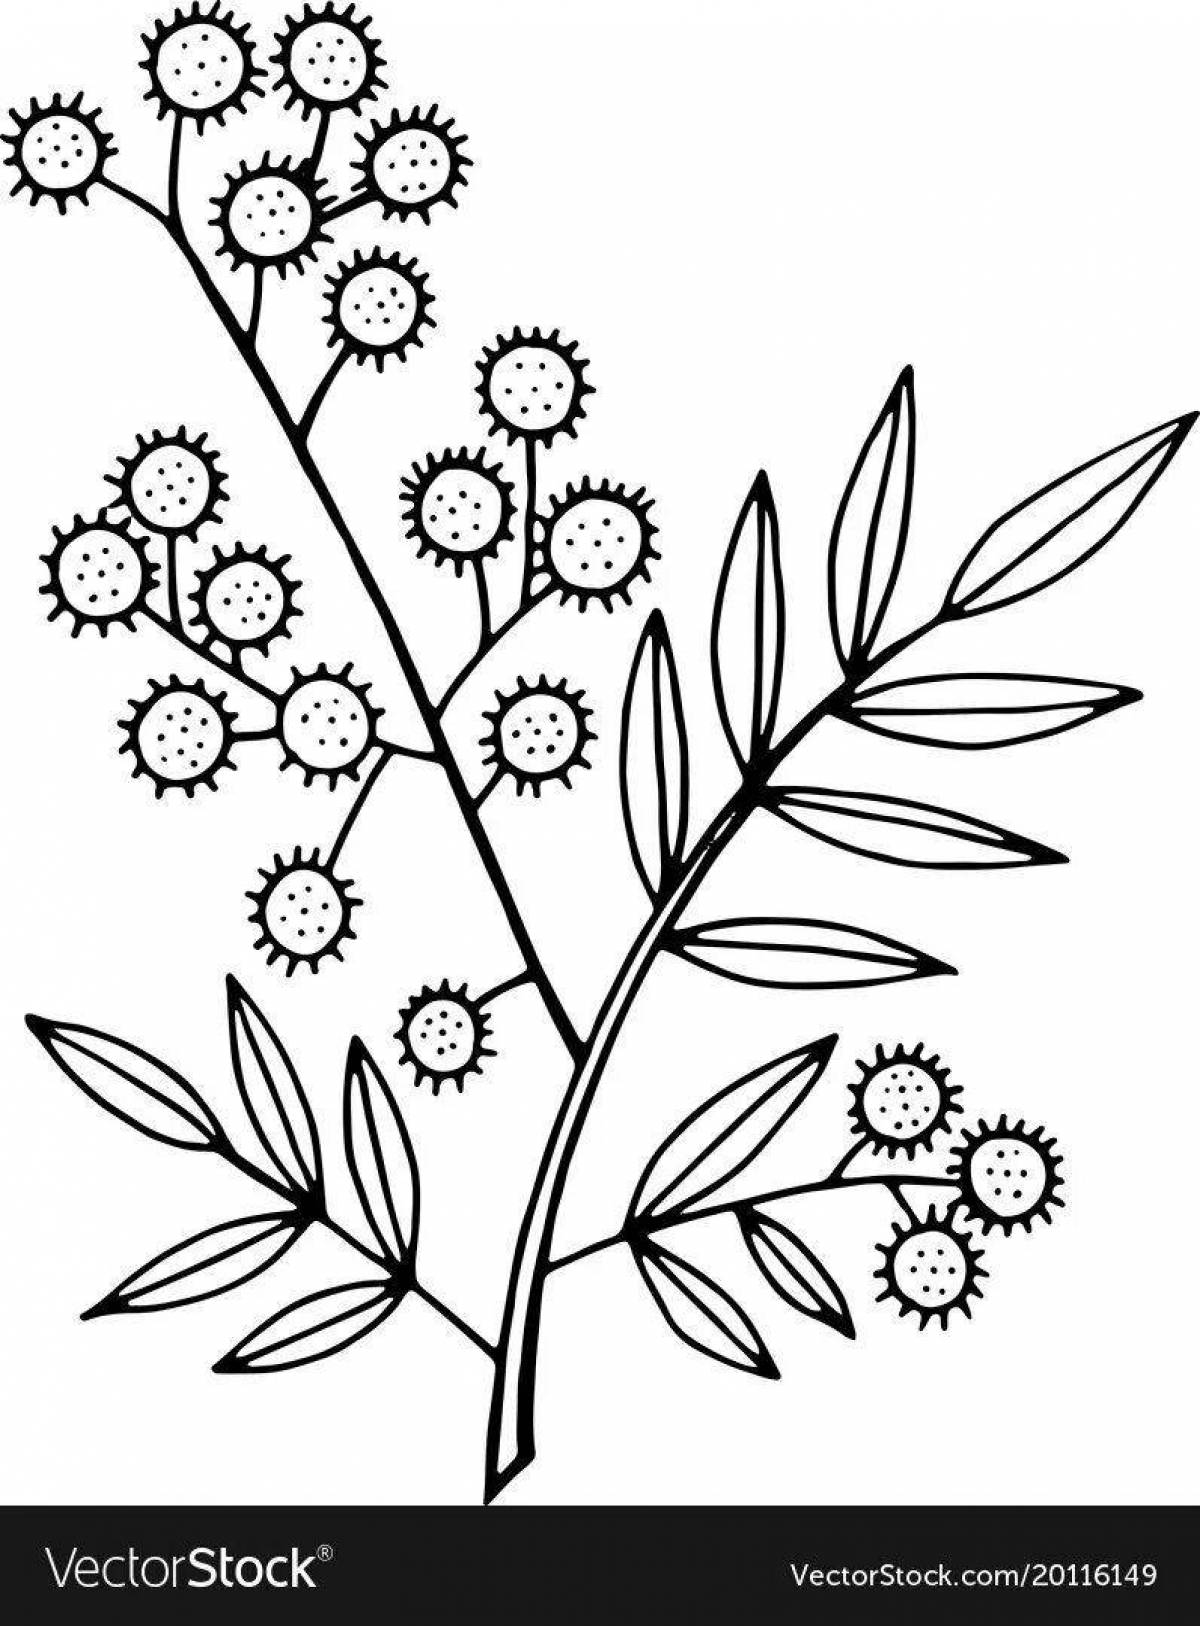 Shining Mimosa Coloring Page for Toddlers